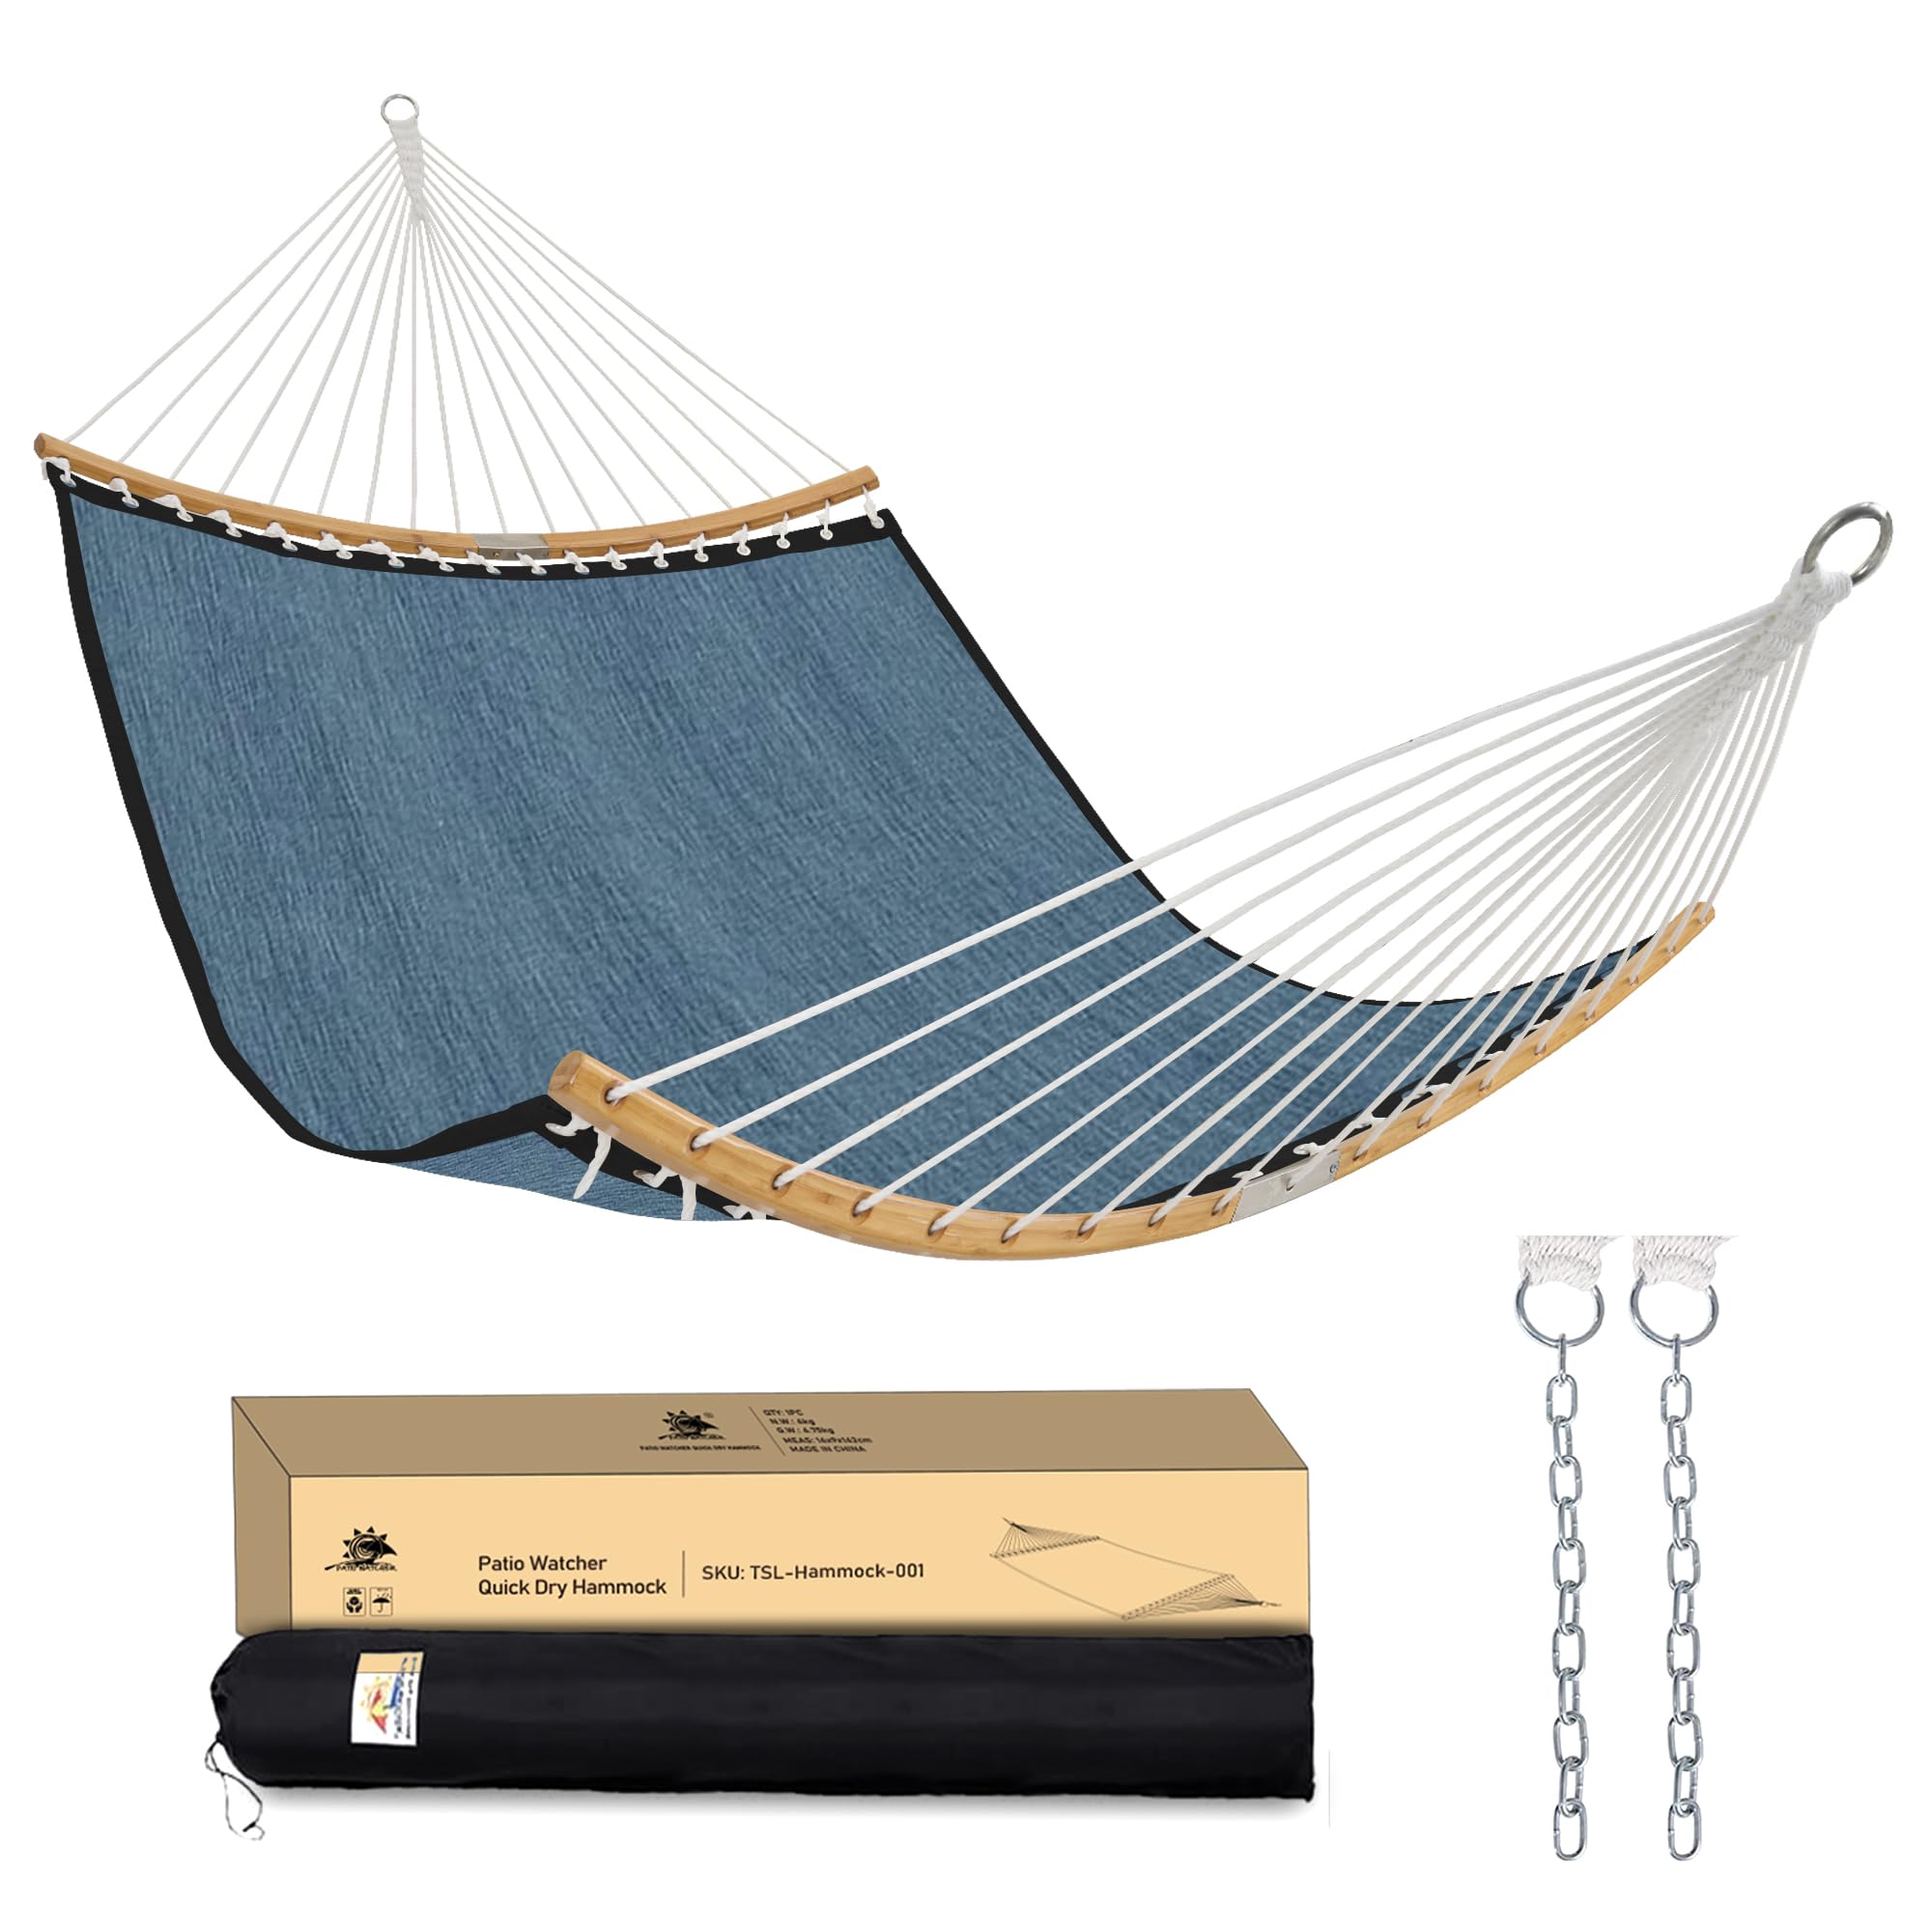 Patio Watcher 14 FT Double Hammock with Curved-Bar Bamboo, Outside Quick Dry Two Person Hammock with Olefin Fabric,Comfortable, Weather-Resistant,450 lbs Capacity, Dark Blue